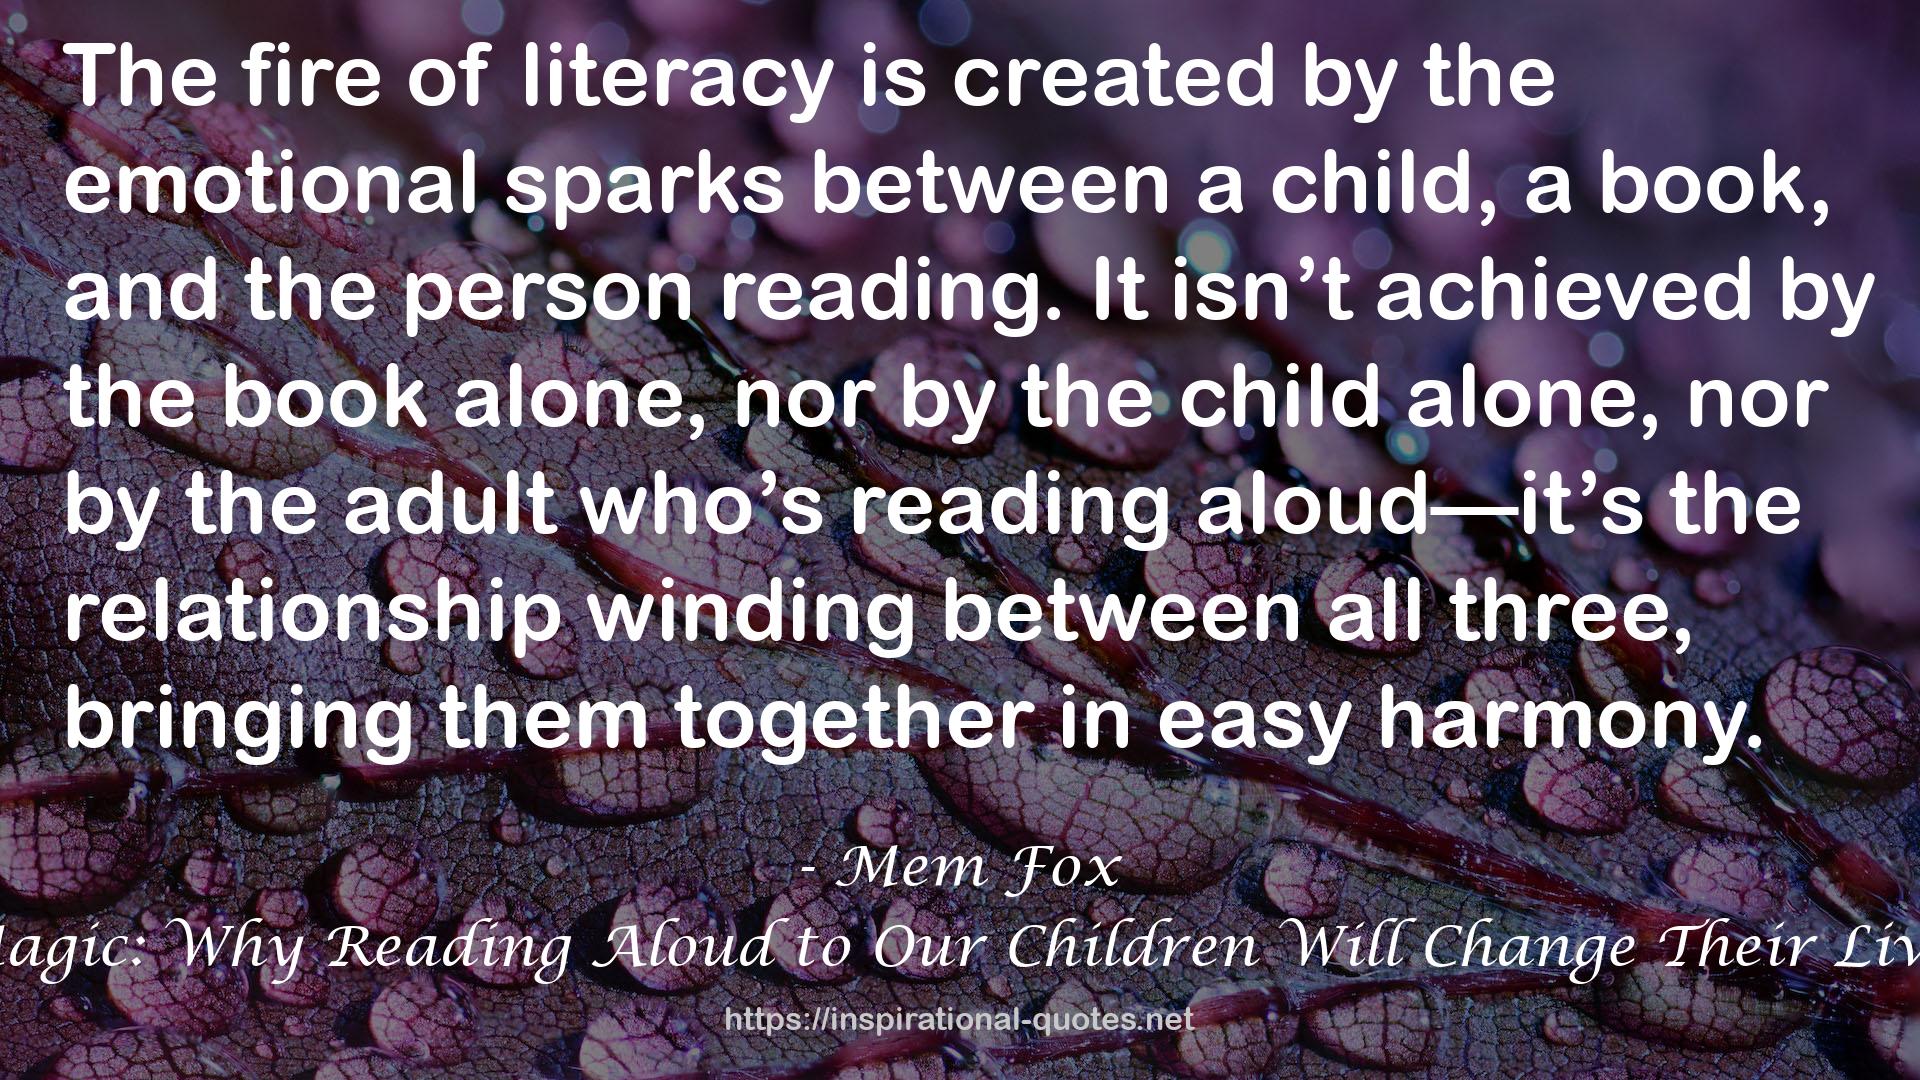 Reading Magic: Why Reading Aloud to Our Children Will Change Their Lives Forever QUOTES